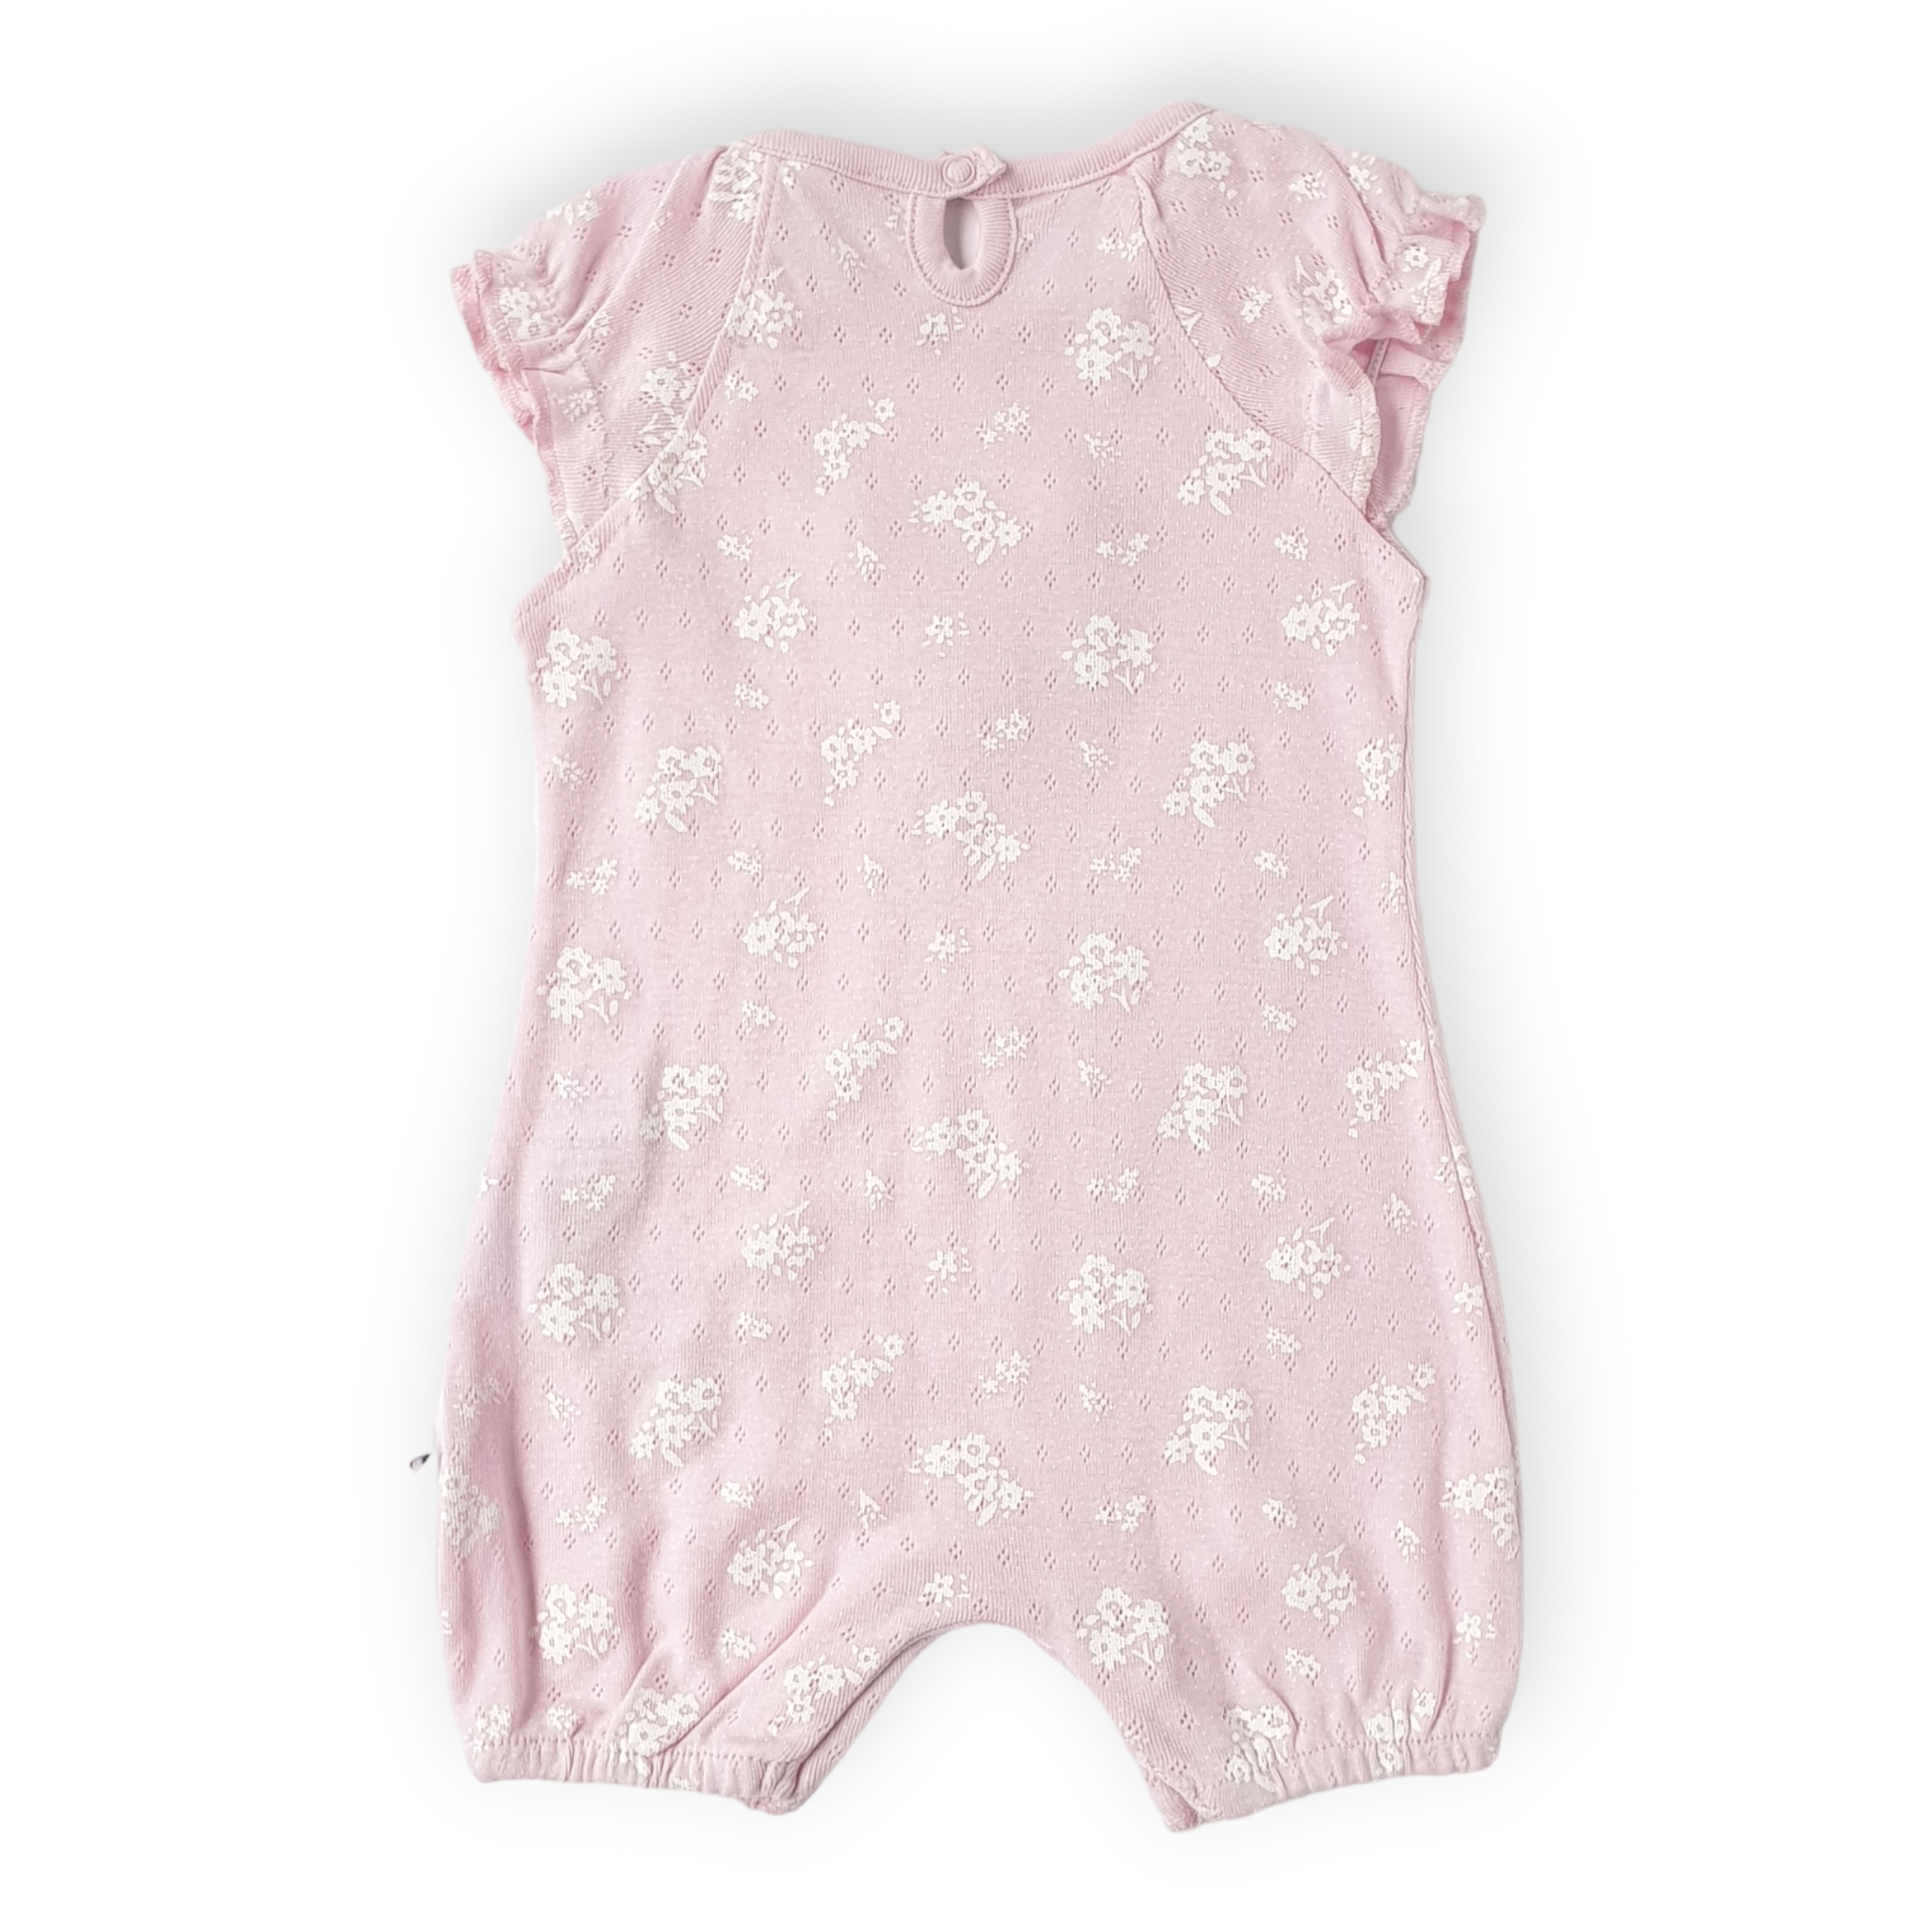 Pink Romper with White Flowers-Catgirl, Catromper, Flower, Flowers, Girl, Pink, Romper, Short Sleeve, SS23, White-Veo-[Too Twee]-[Tootwee]-[baby]-[newborn]-[clothes]-[essentials]-[toys]-[Lebanon]